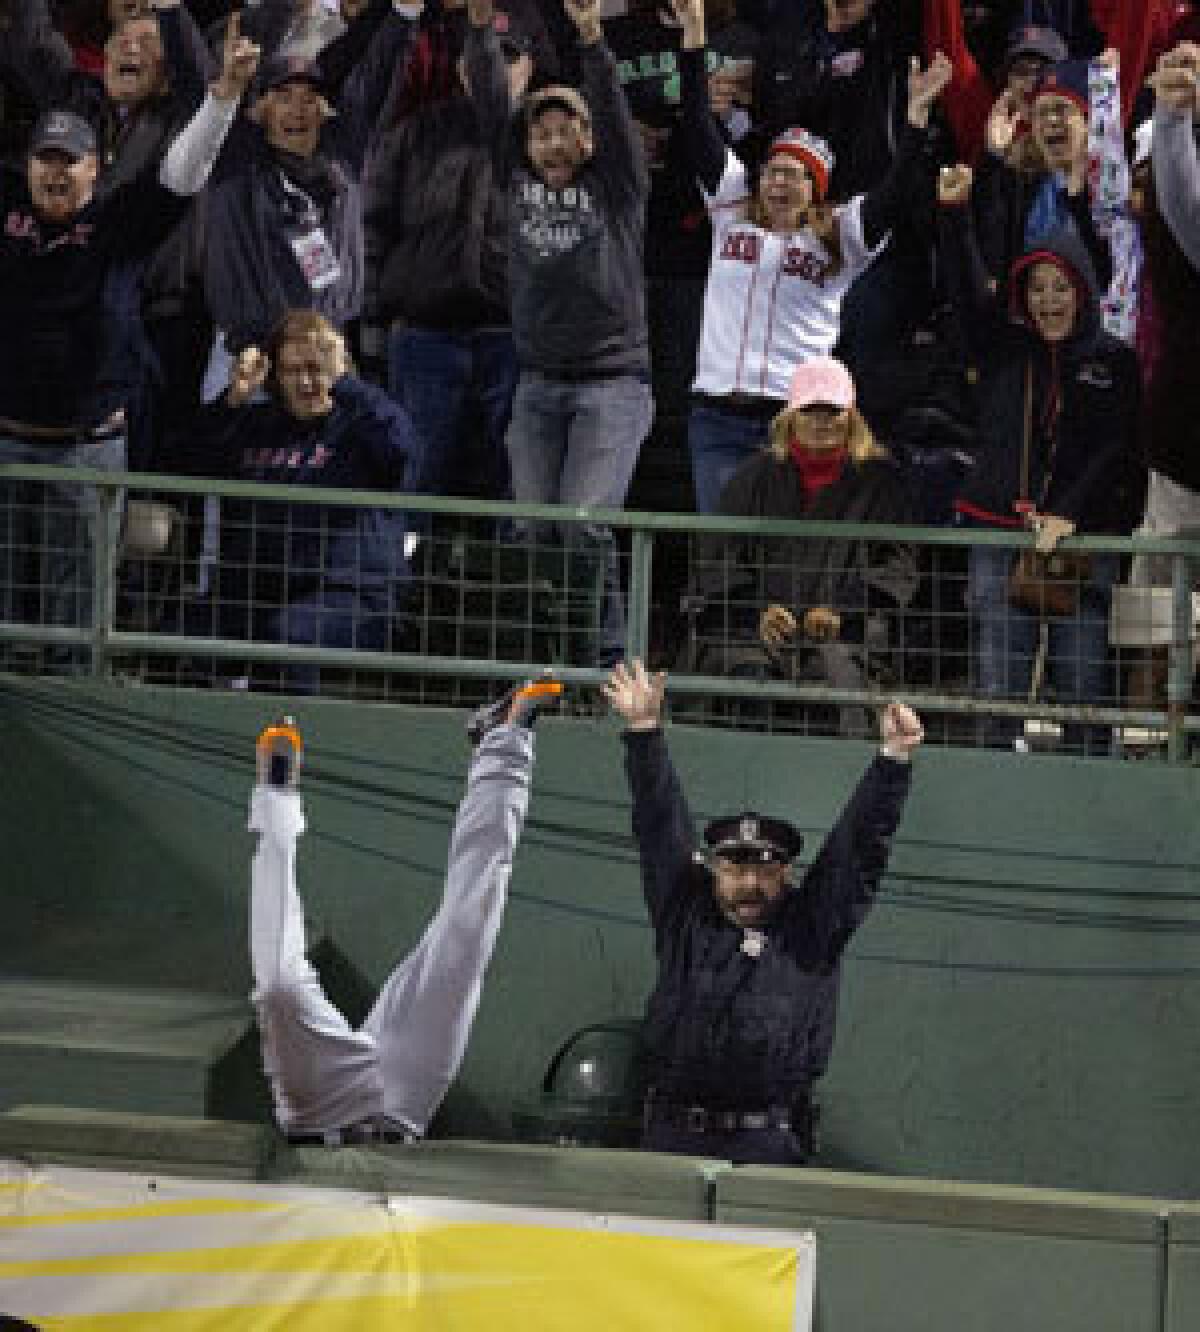 Fans and Boston Police officer Steve Horgan celebrate as Detroit Tigers' Torii Hunter falls over the right field fence into the bullpen trying to catch a grand slam hit by David Ortiz during Game 2.